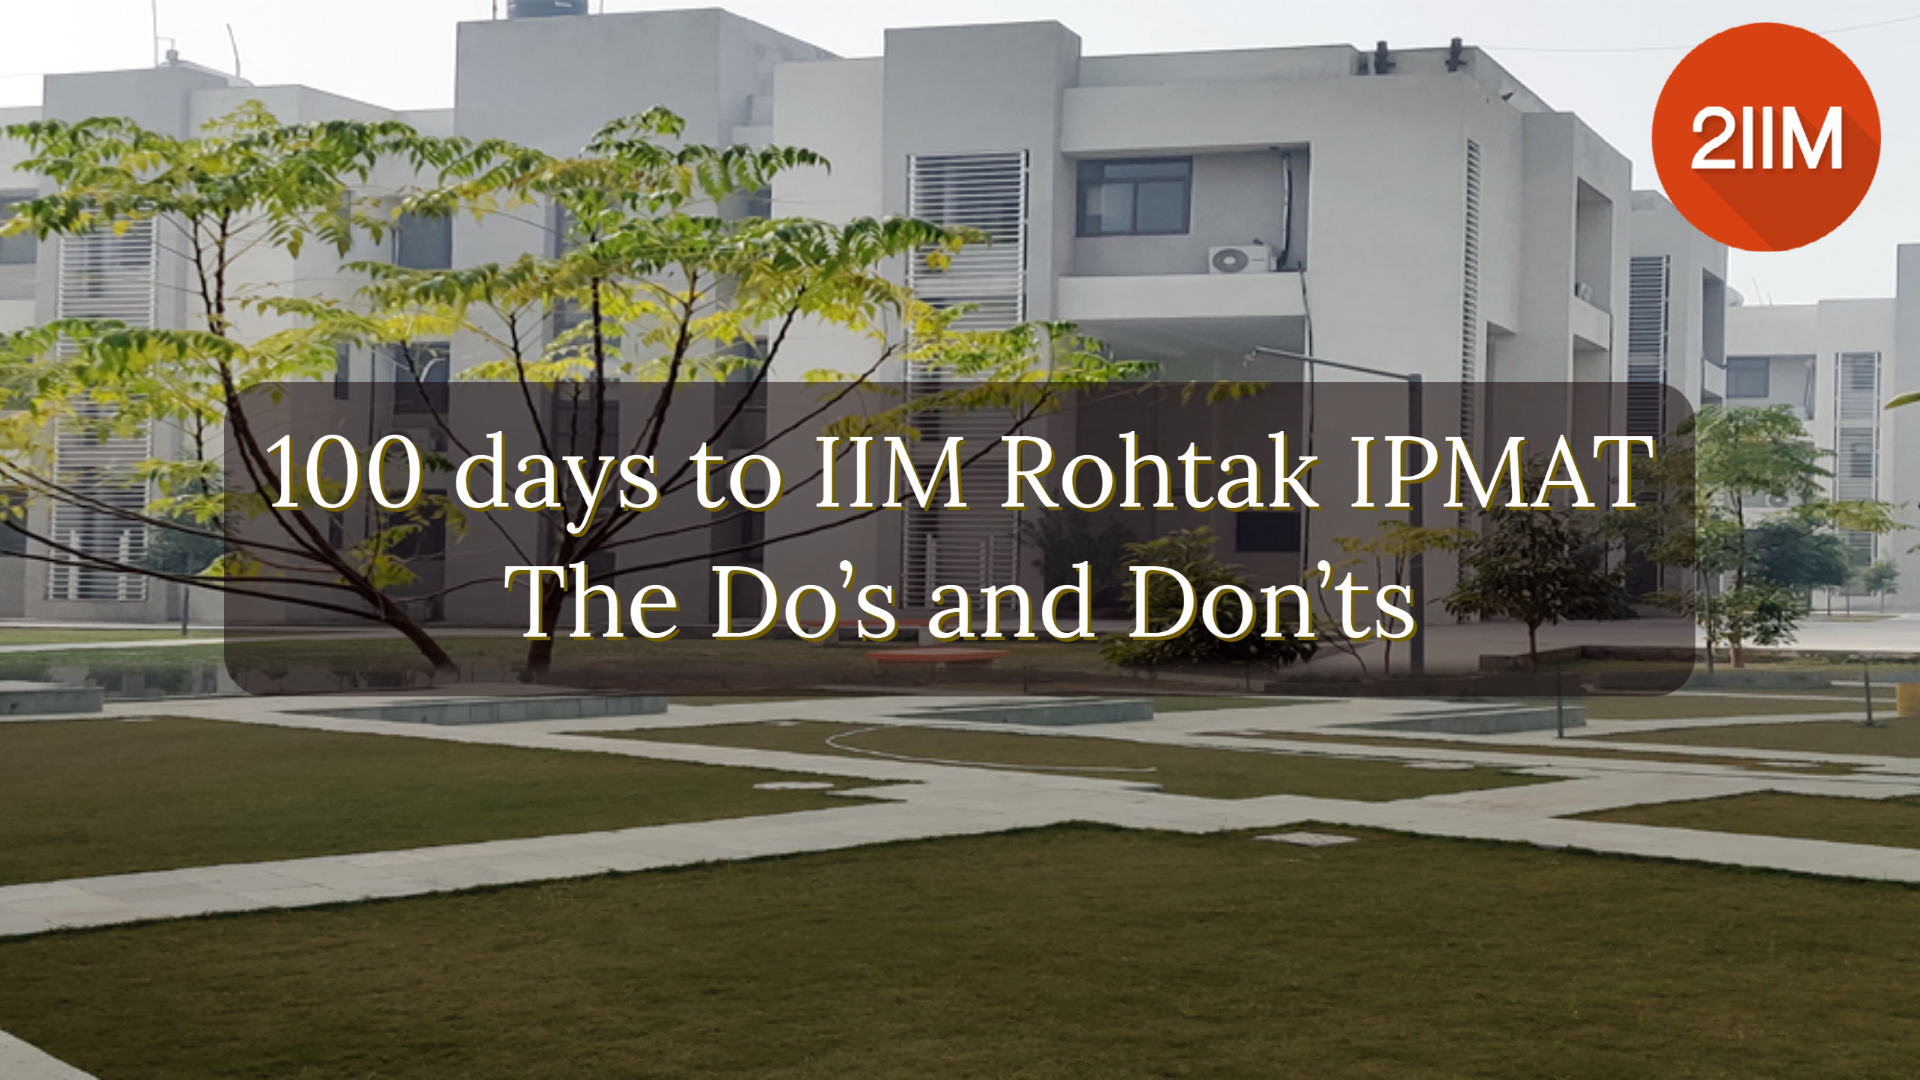 100 days to IIM Rohtak IPMAT: The Do's and Don'ts